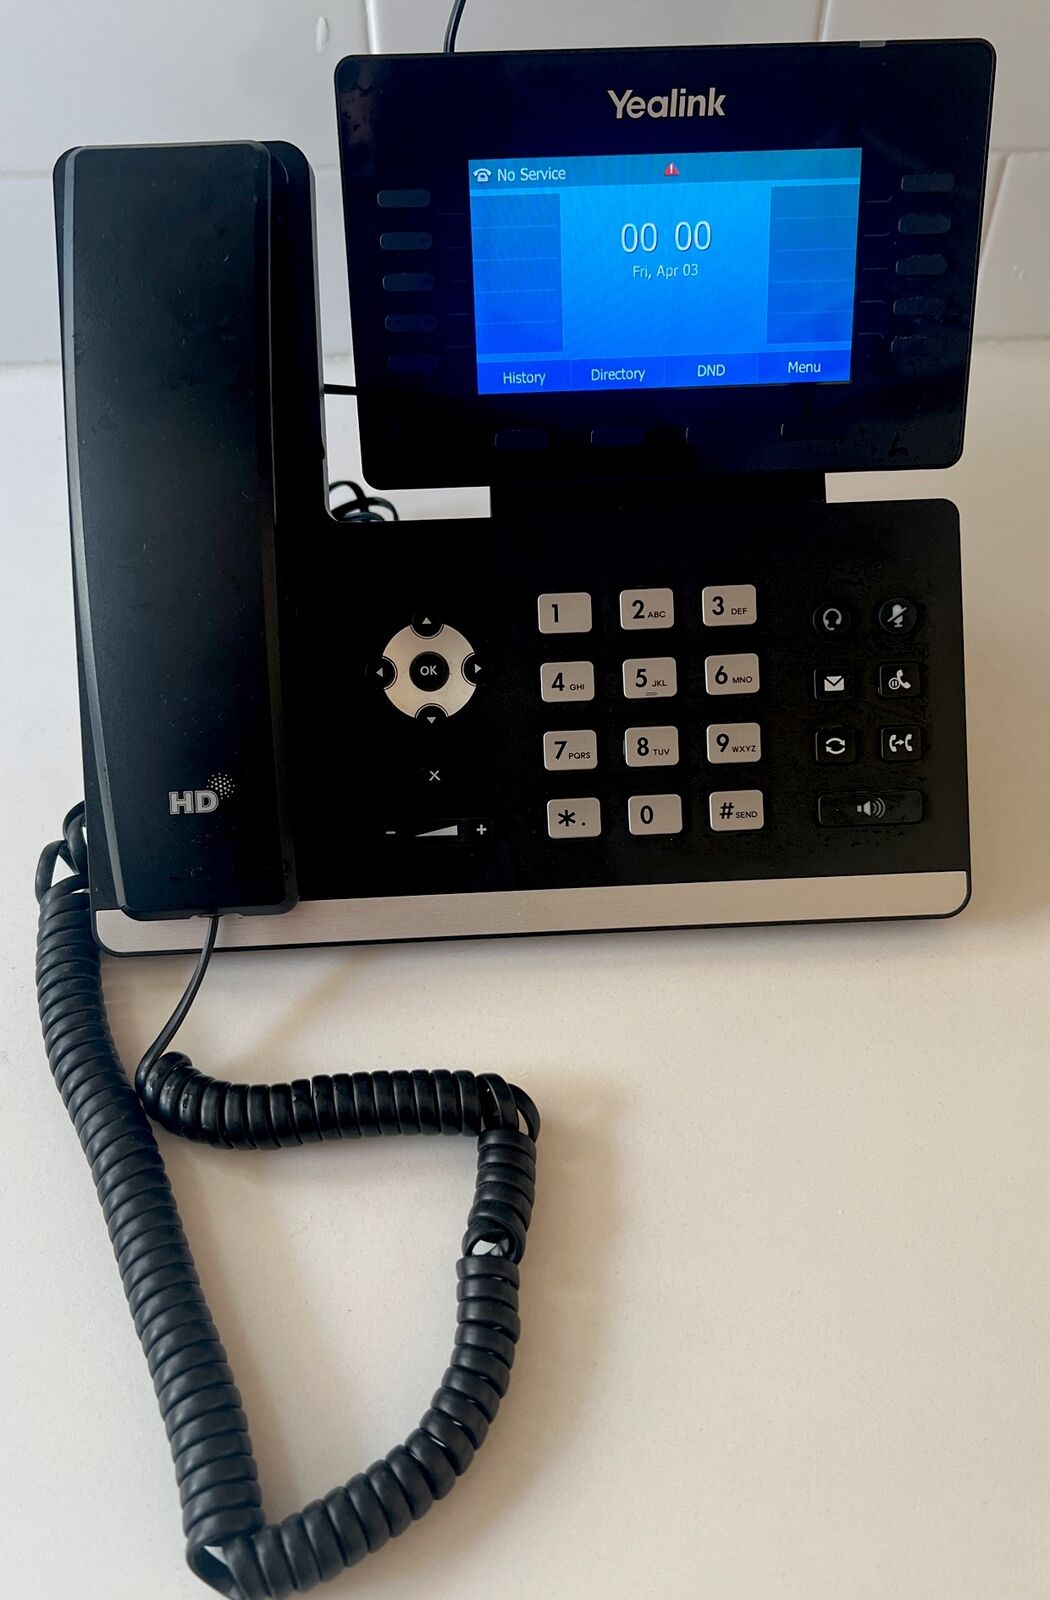 Yealink SIPT54W IP Phone Color Display - Includes Power Adapter